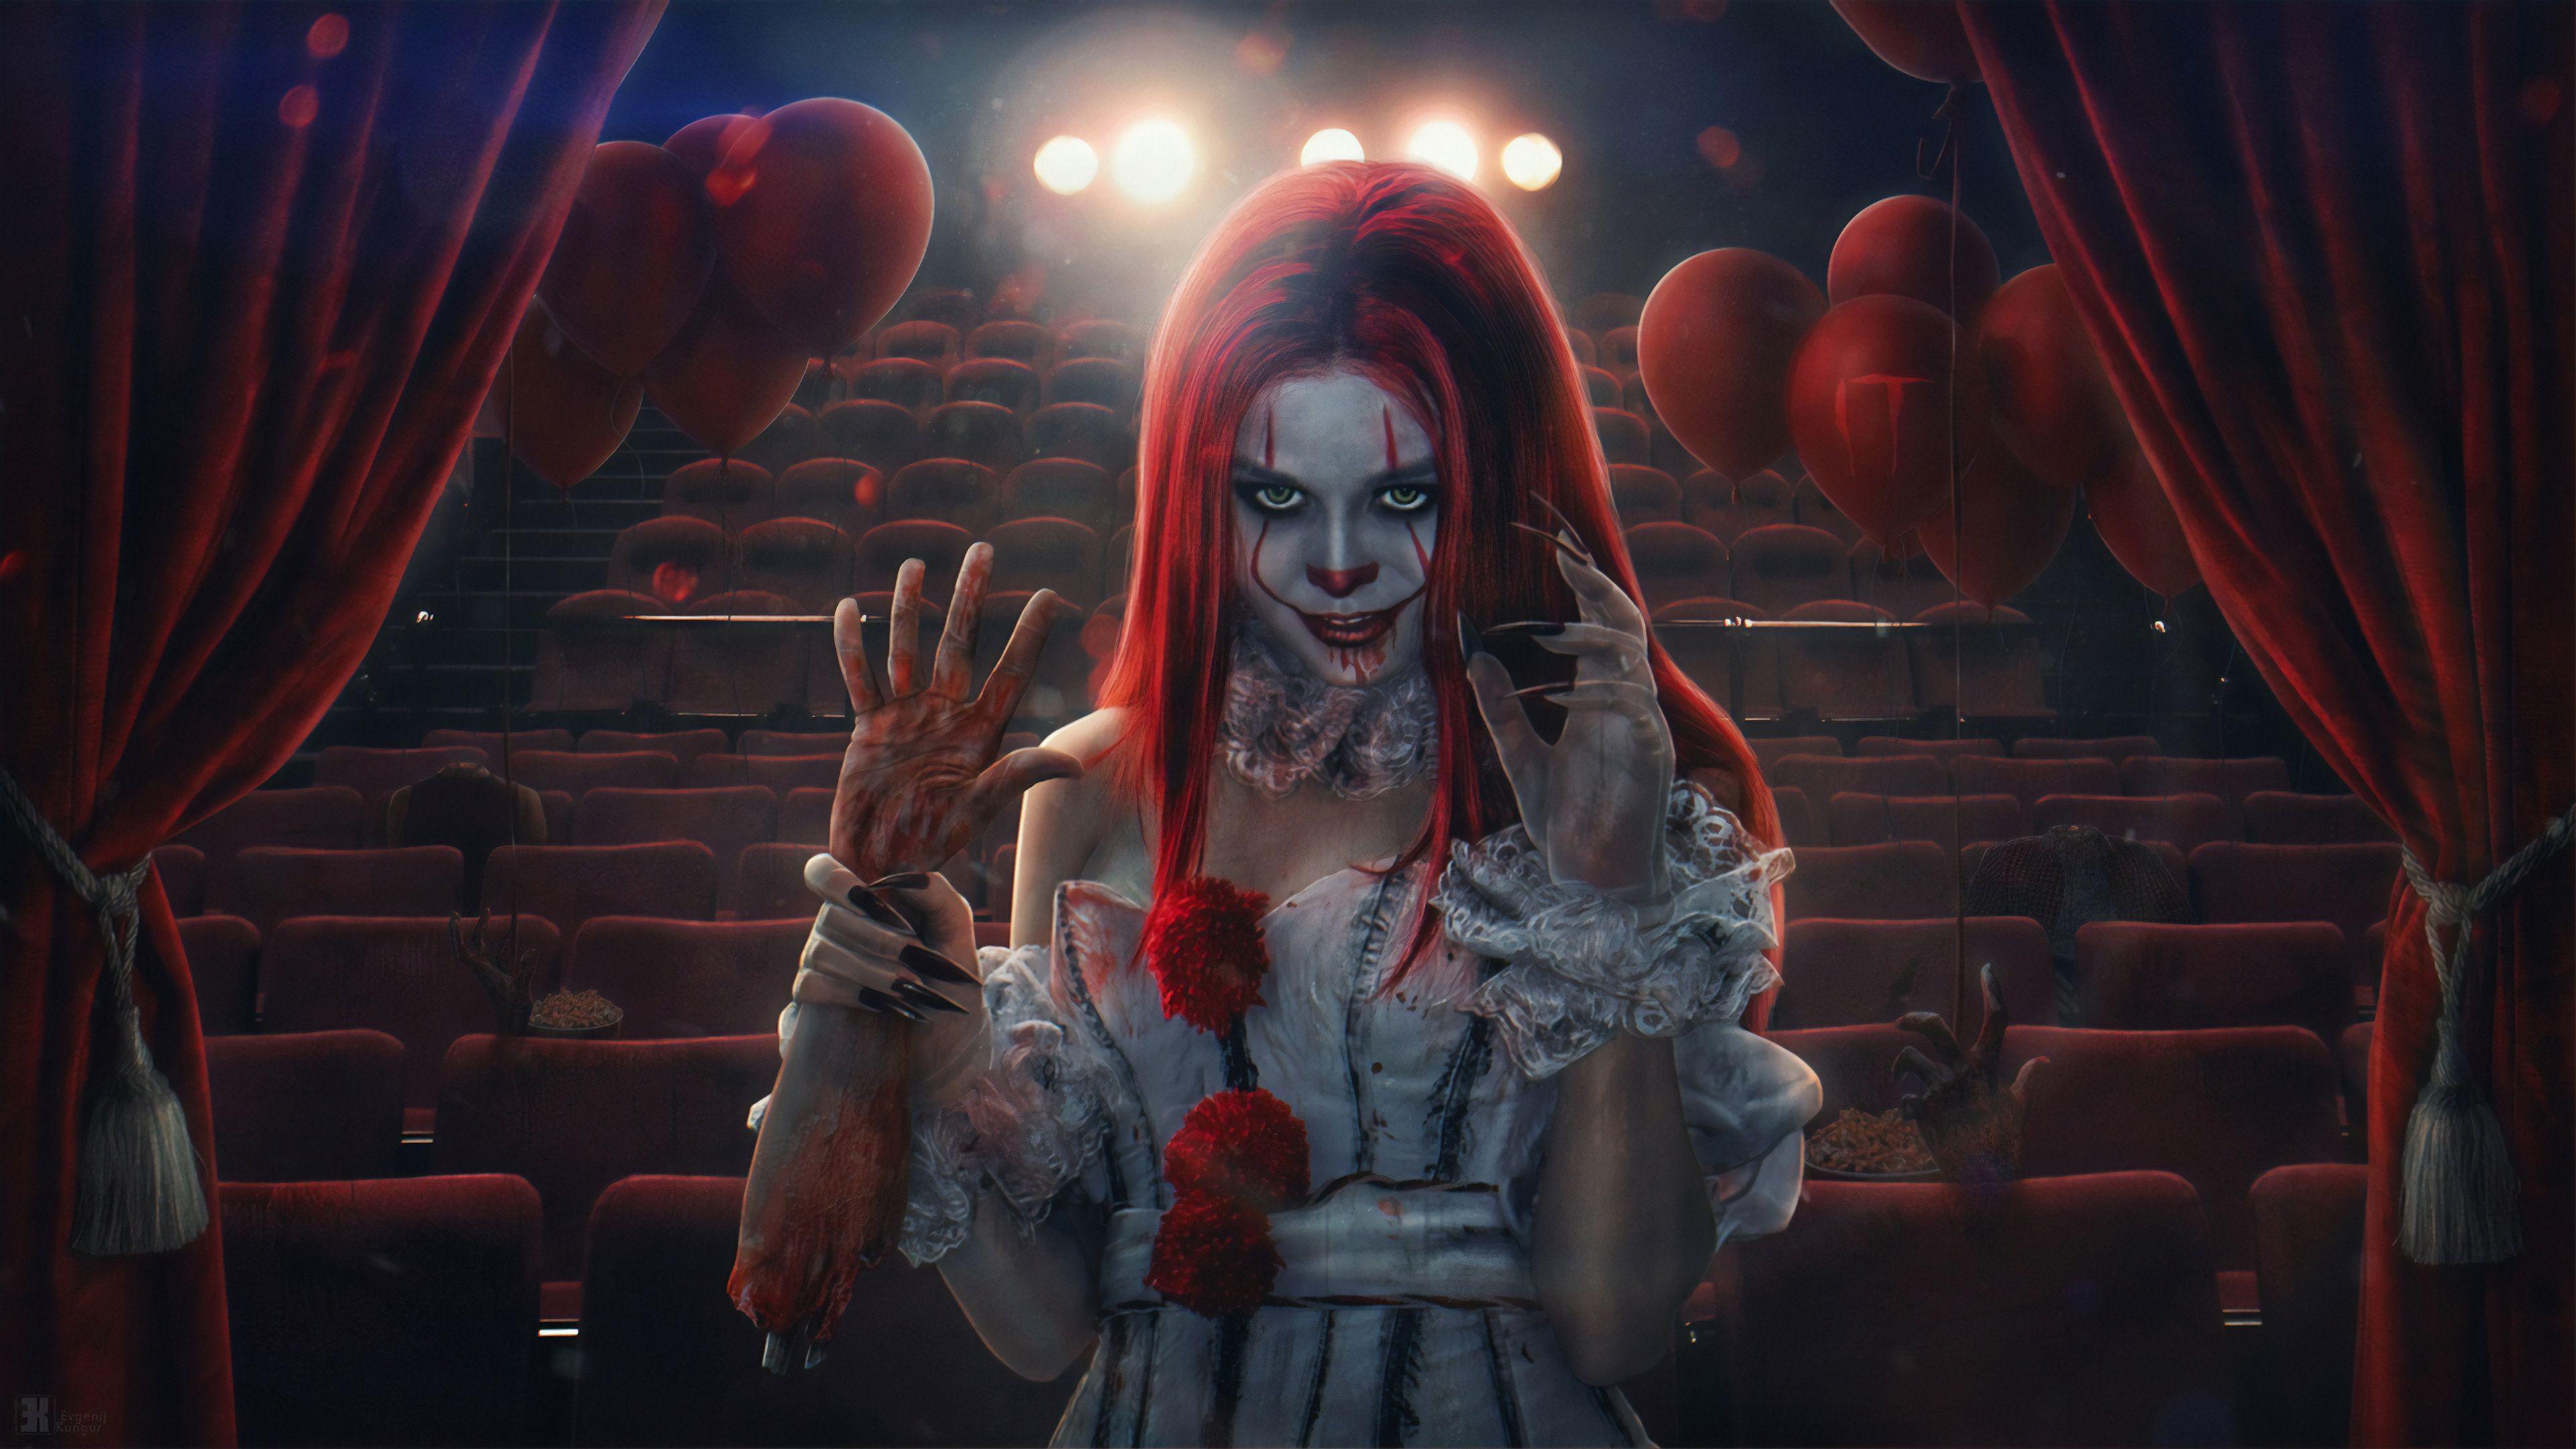 Download Pennywise IT Wallpaper HD 4K Free for Android - Pennywise IT  Wallpaper HD 4K APK Download - STEPrimo.com